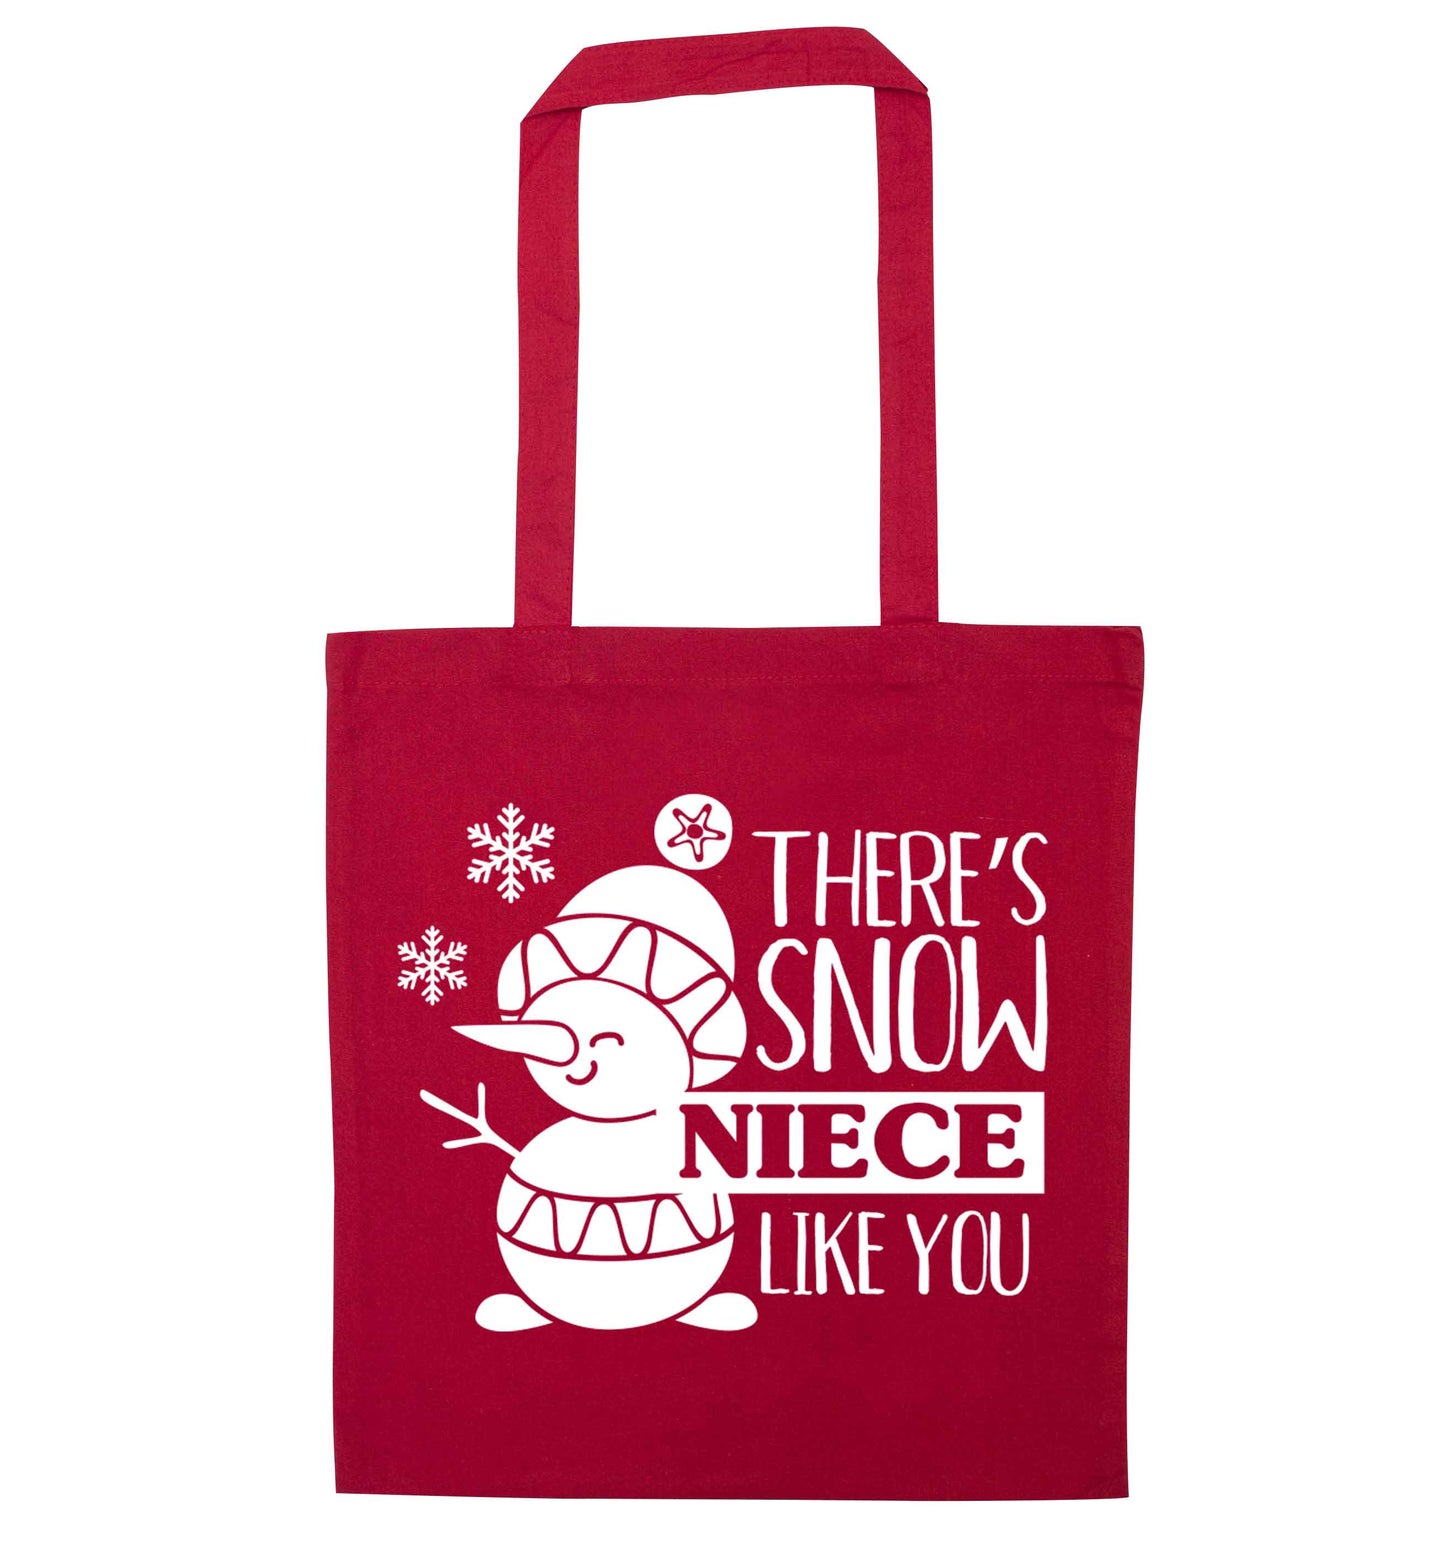 There's snow niece like you red tote bag